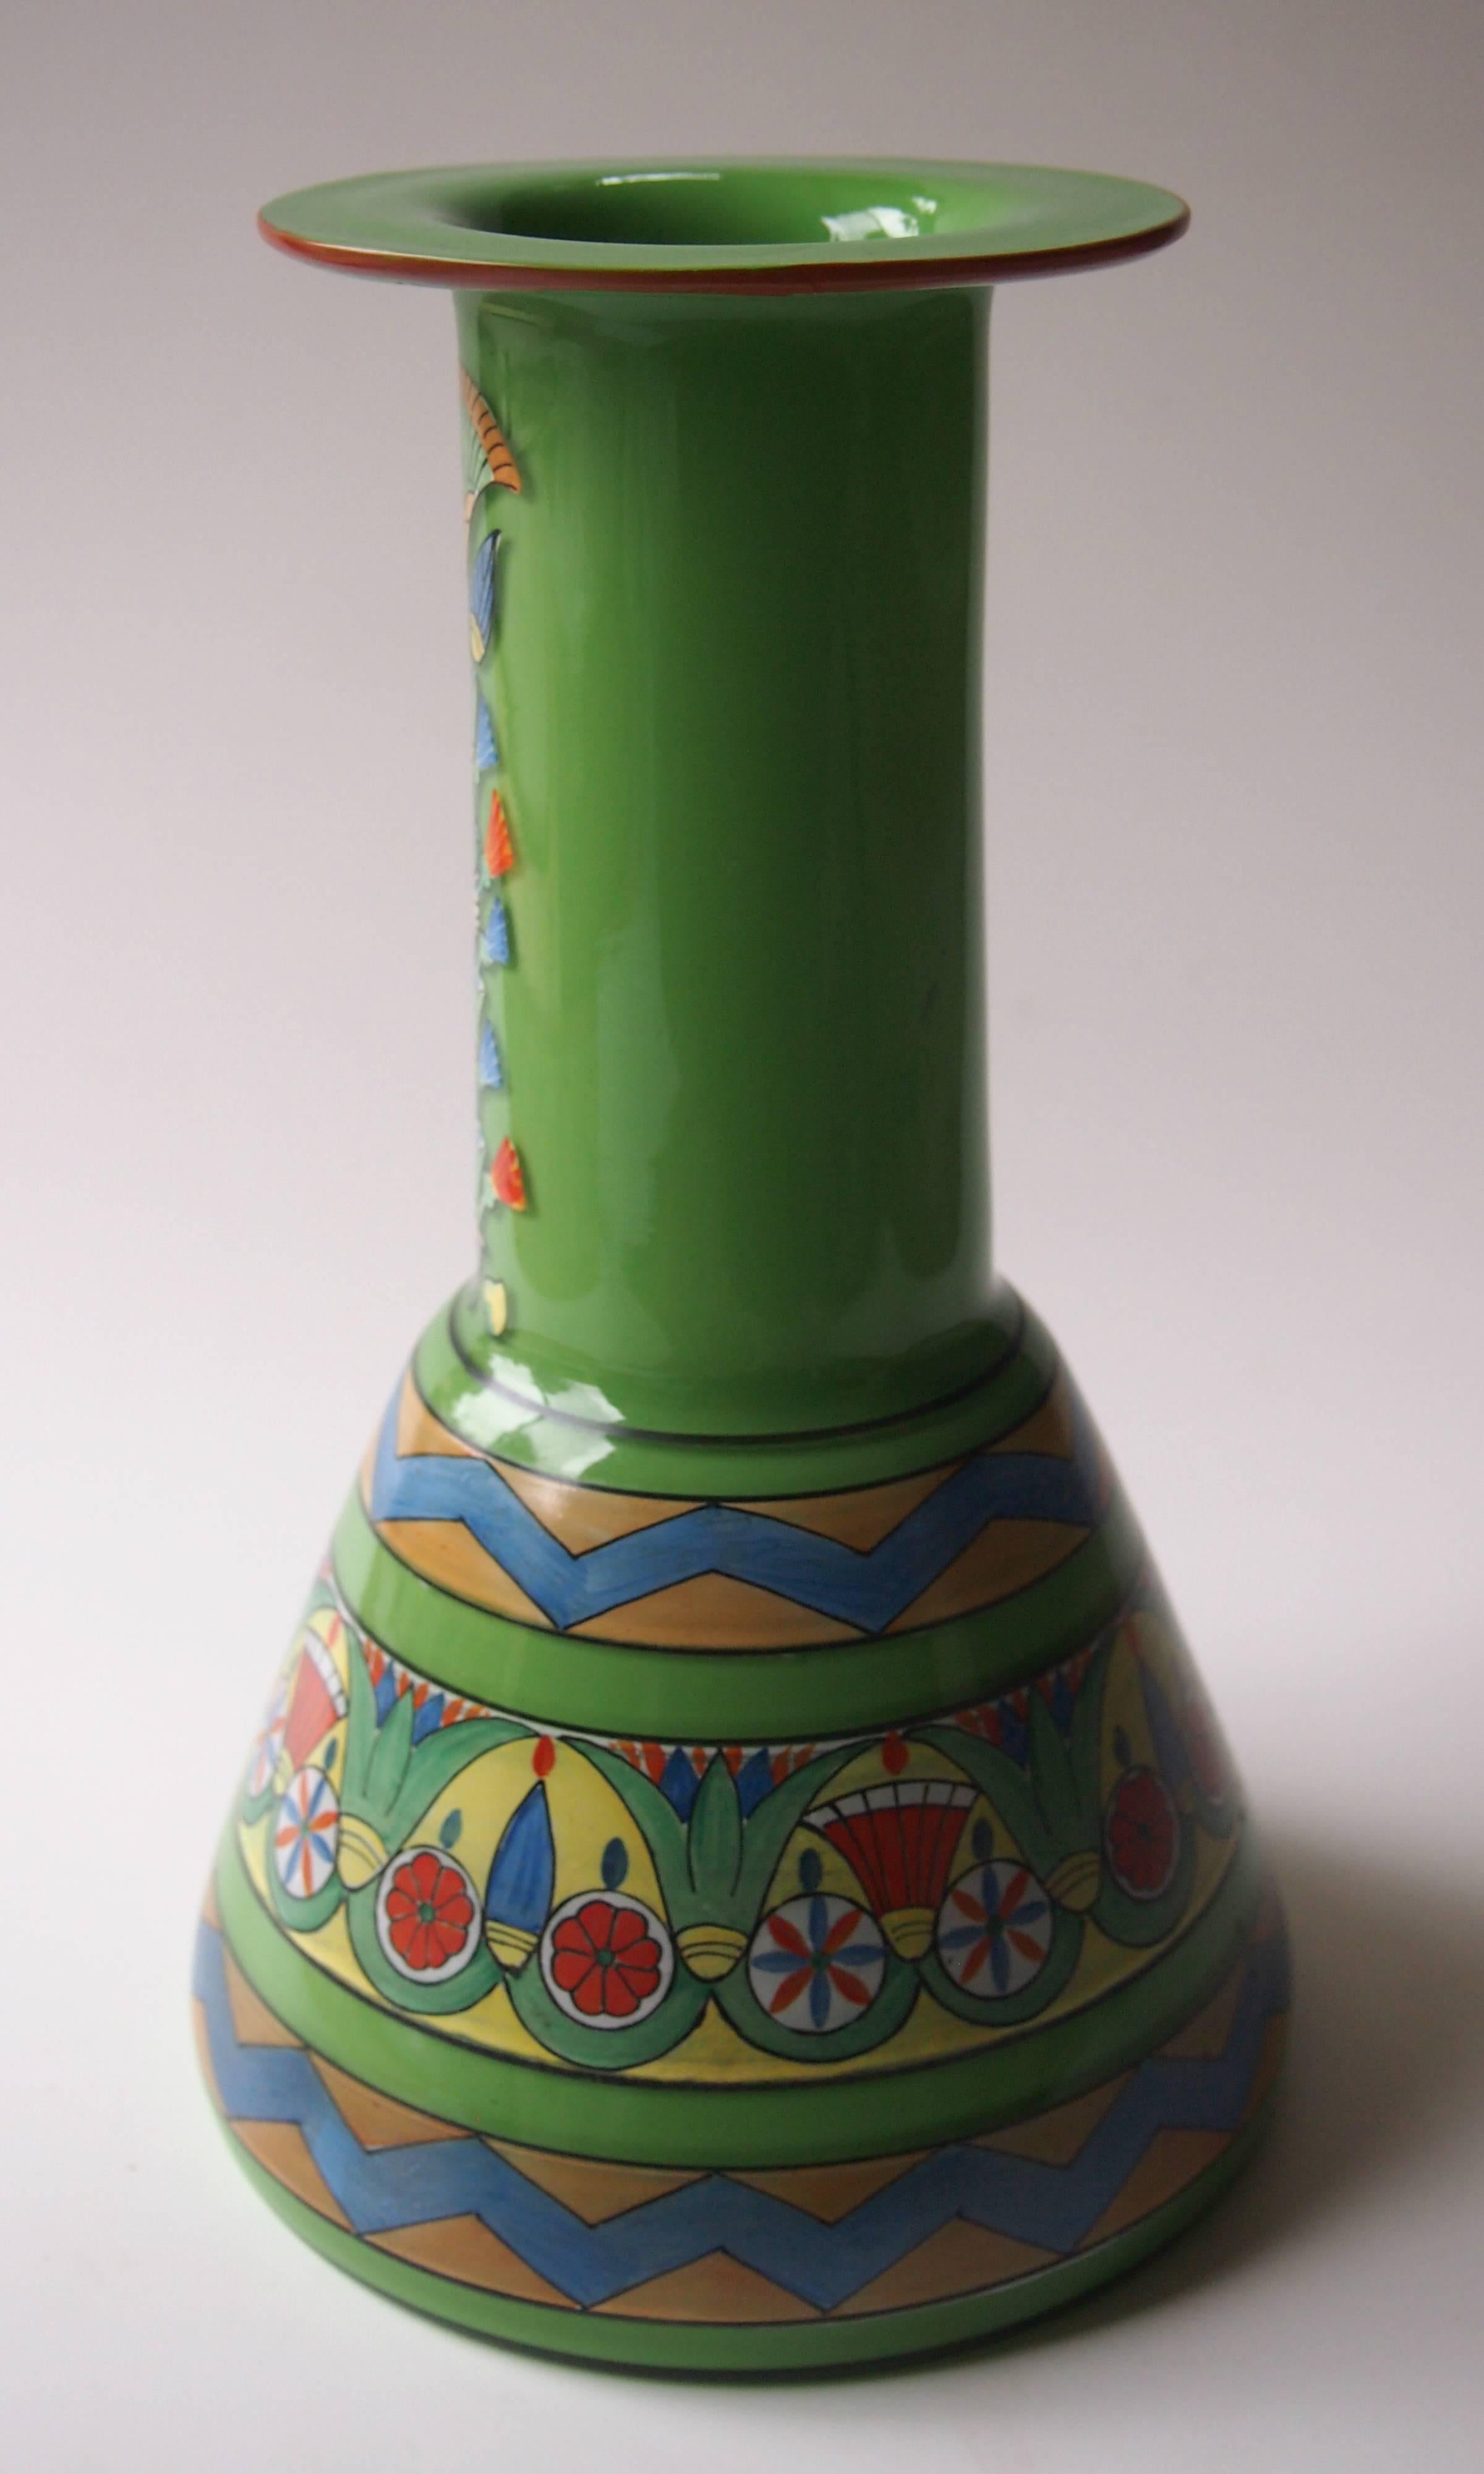 A super early Art Deco enameled moser Egyptian/Tutankhamun style green cased vase -decorated with a variety of Egyptian imagery -papyrus, lotus flowers etc. This would have almost certainly been produced after the announcement of the opening of